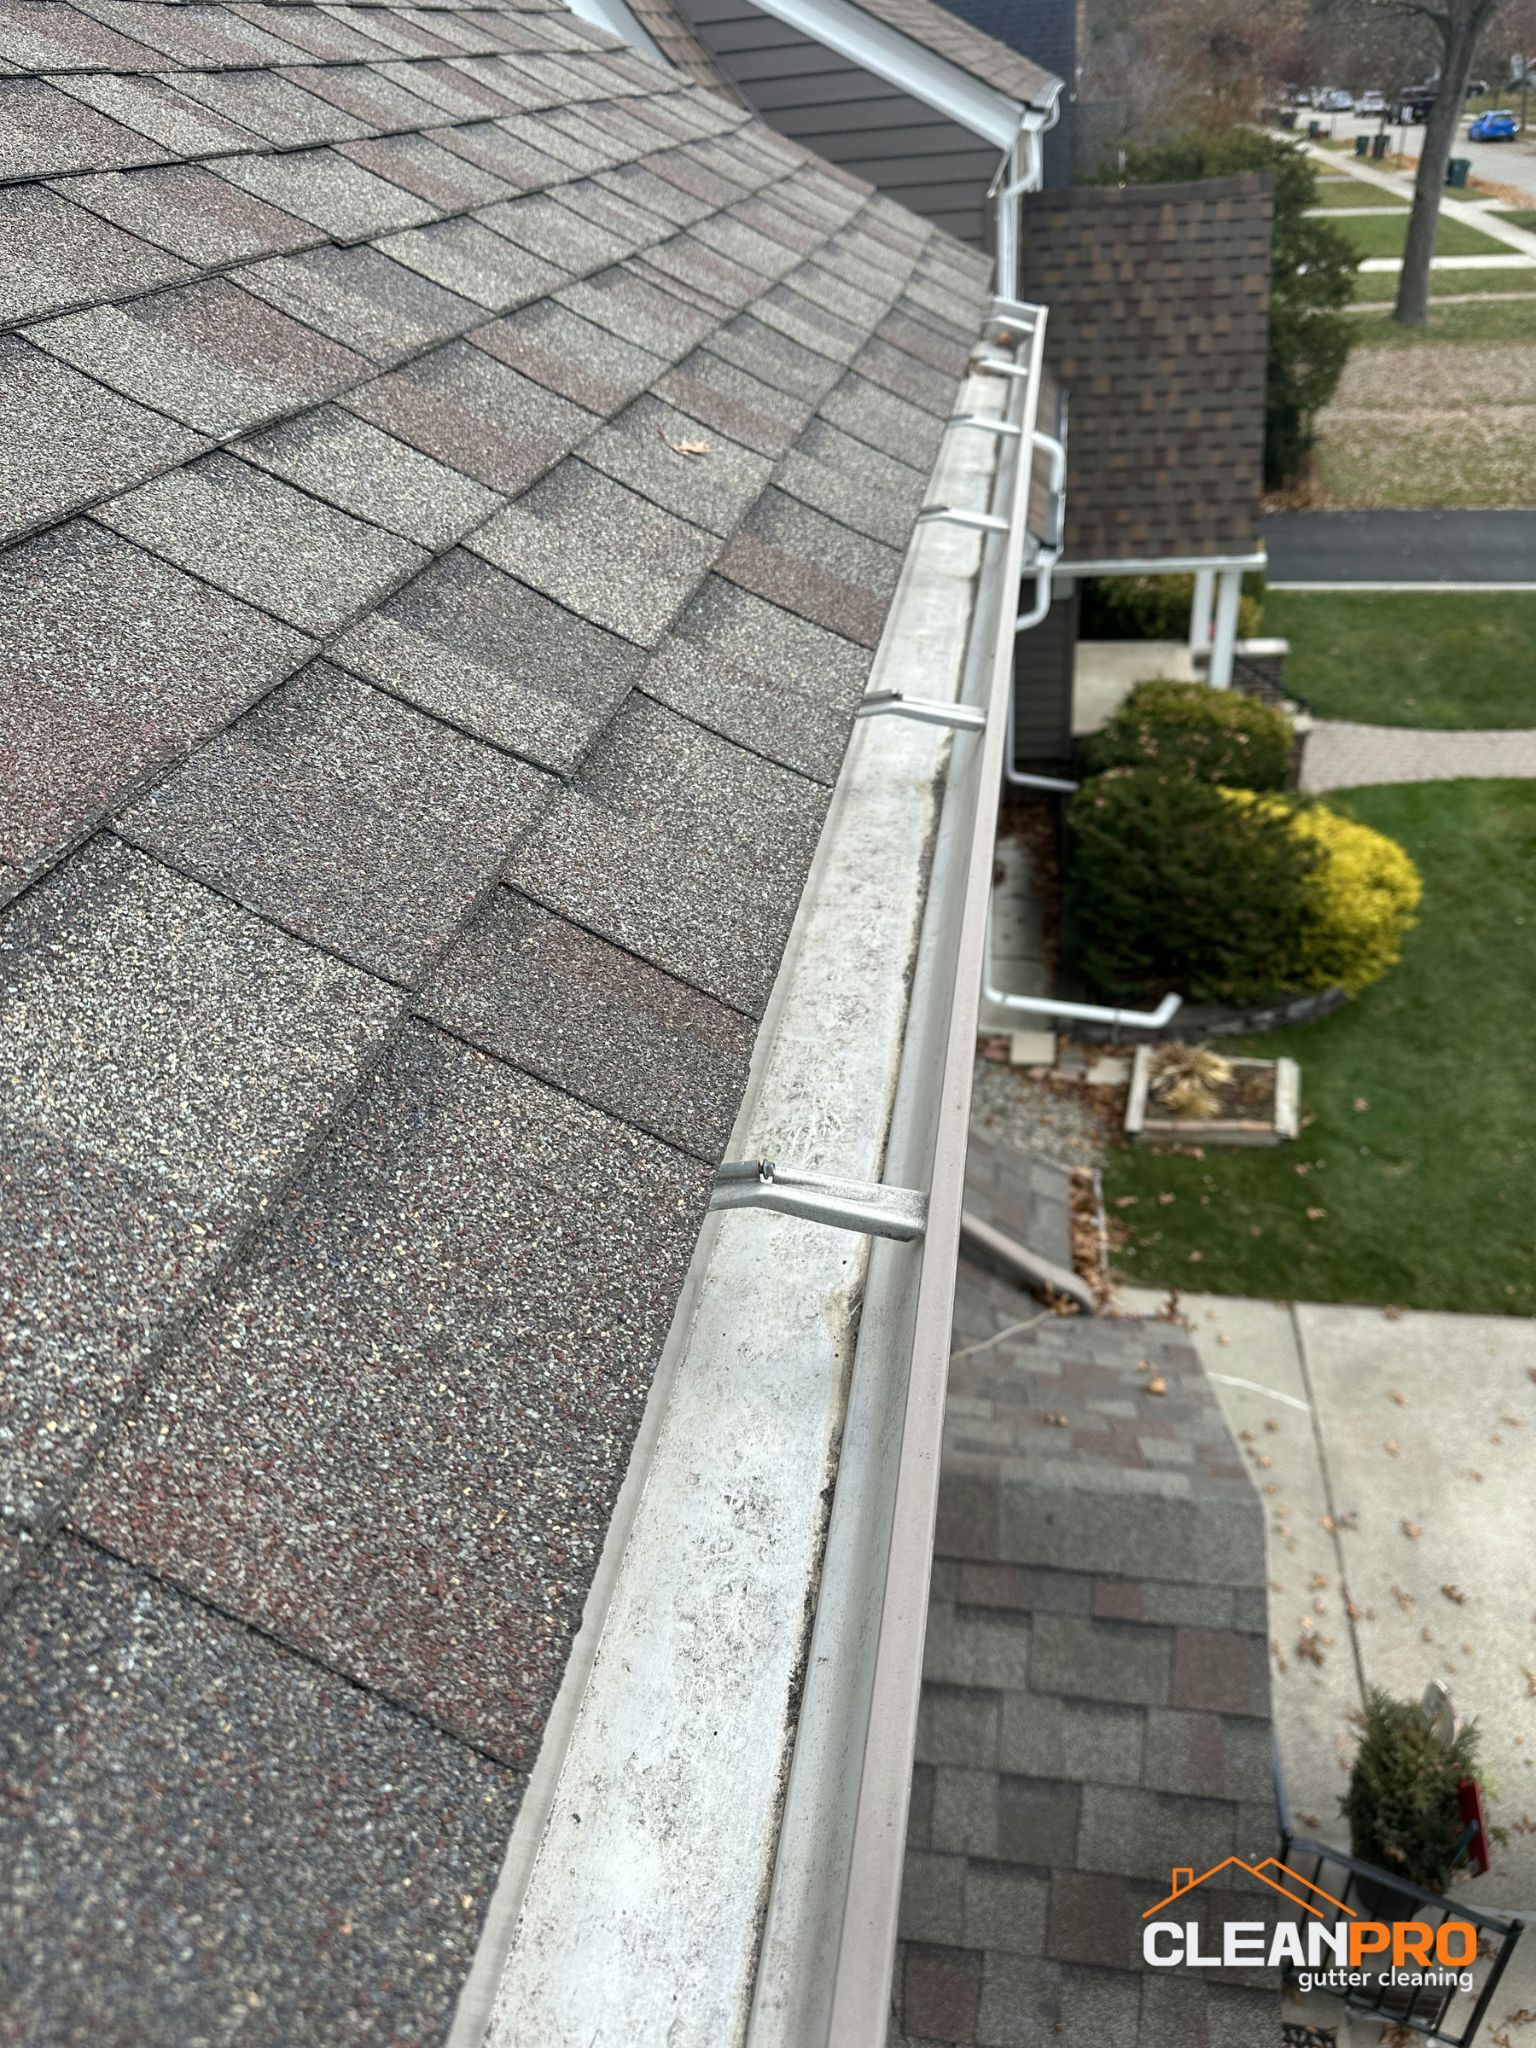 Local Gutter Cleaning in Detroit